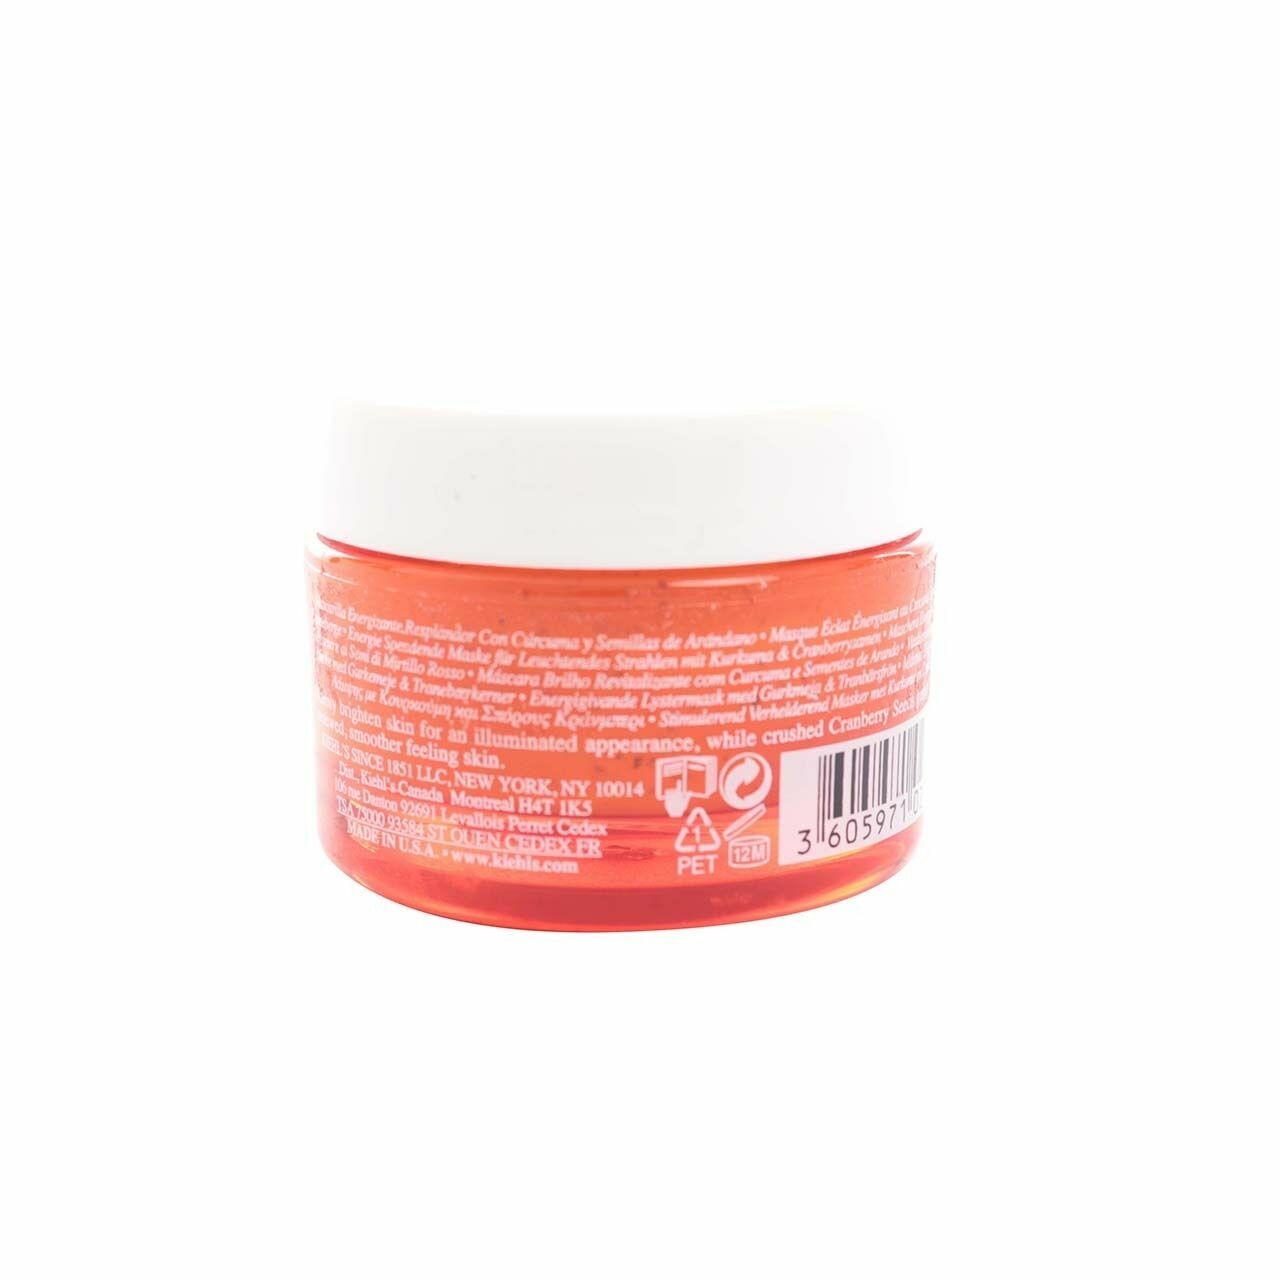 Kiehl's Turmeric and Cranberry Seed Energizing Radiance Masque Skin Care